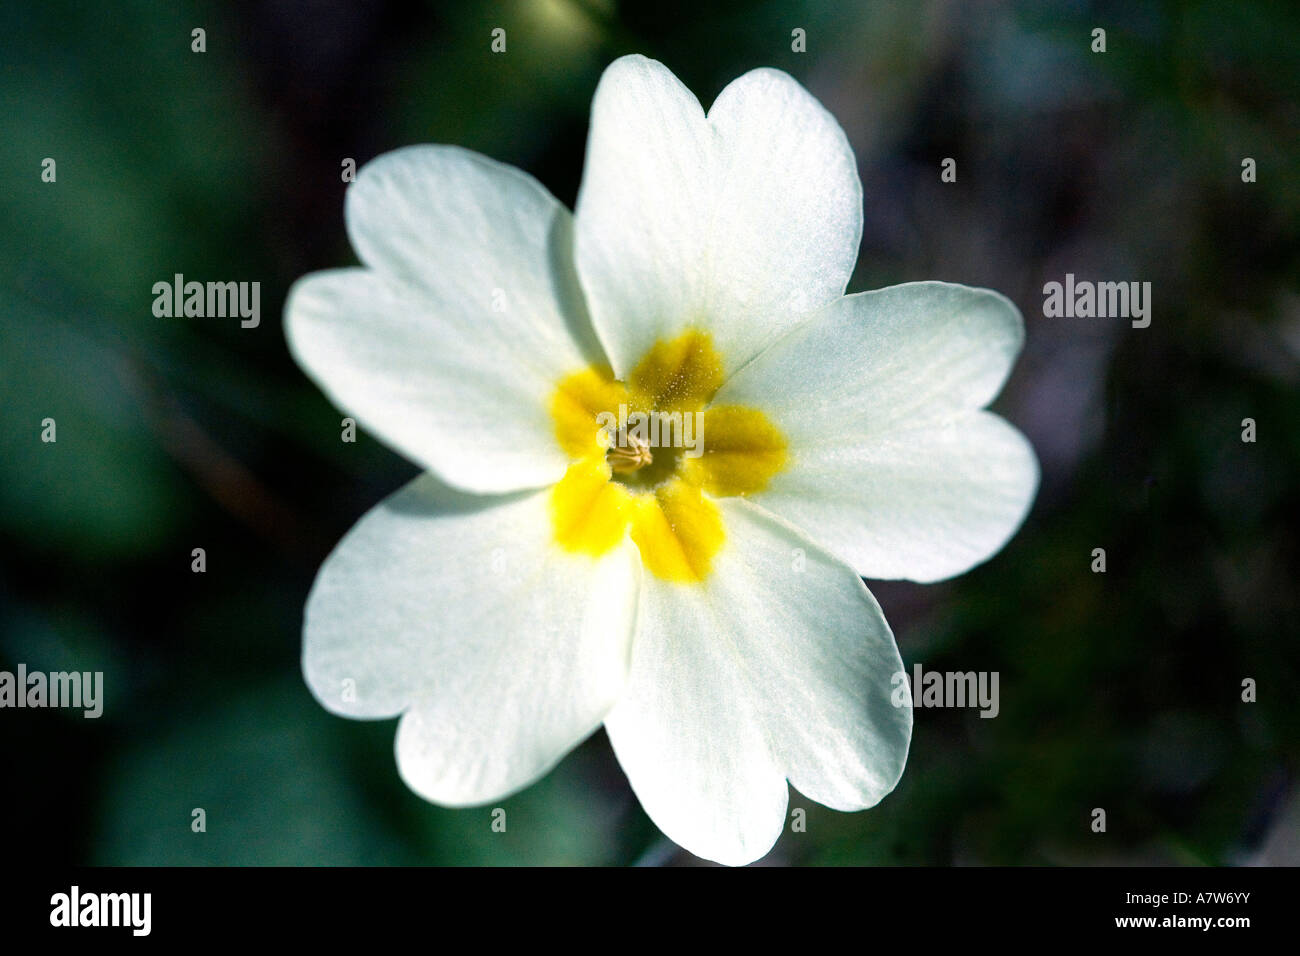 Clear, bright Primrose flower fully opened in the spring sunshine. A native flowering plant to Britain and Europe. Stock Photo